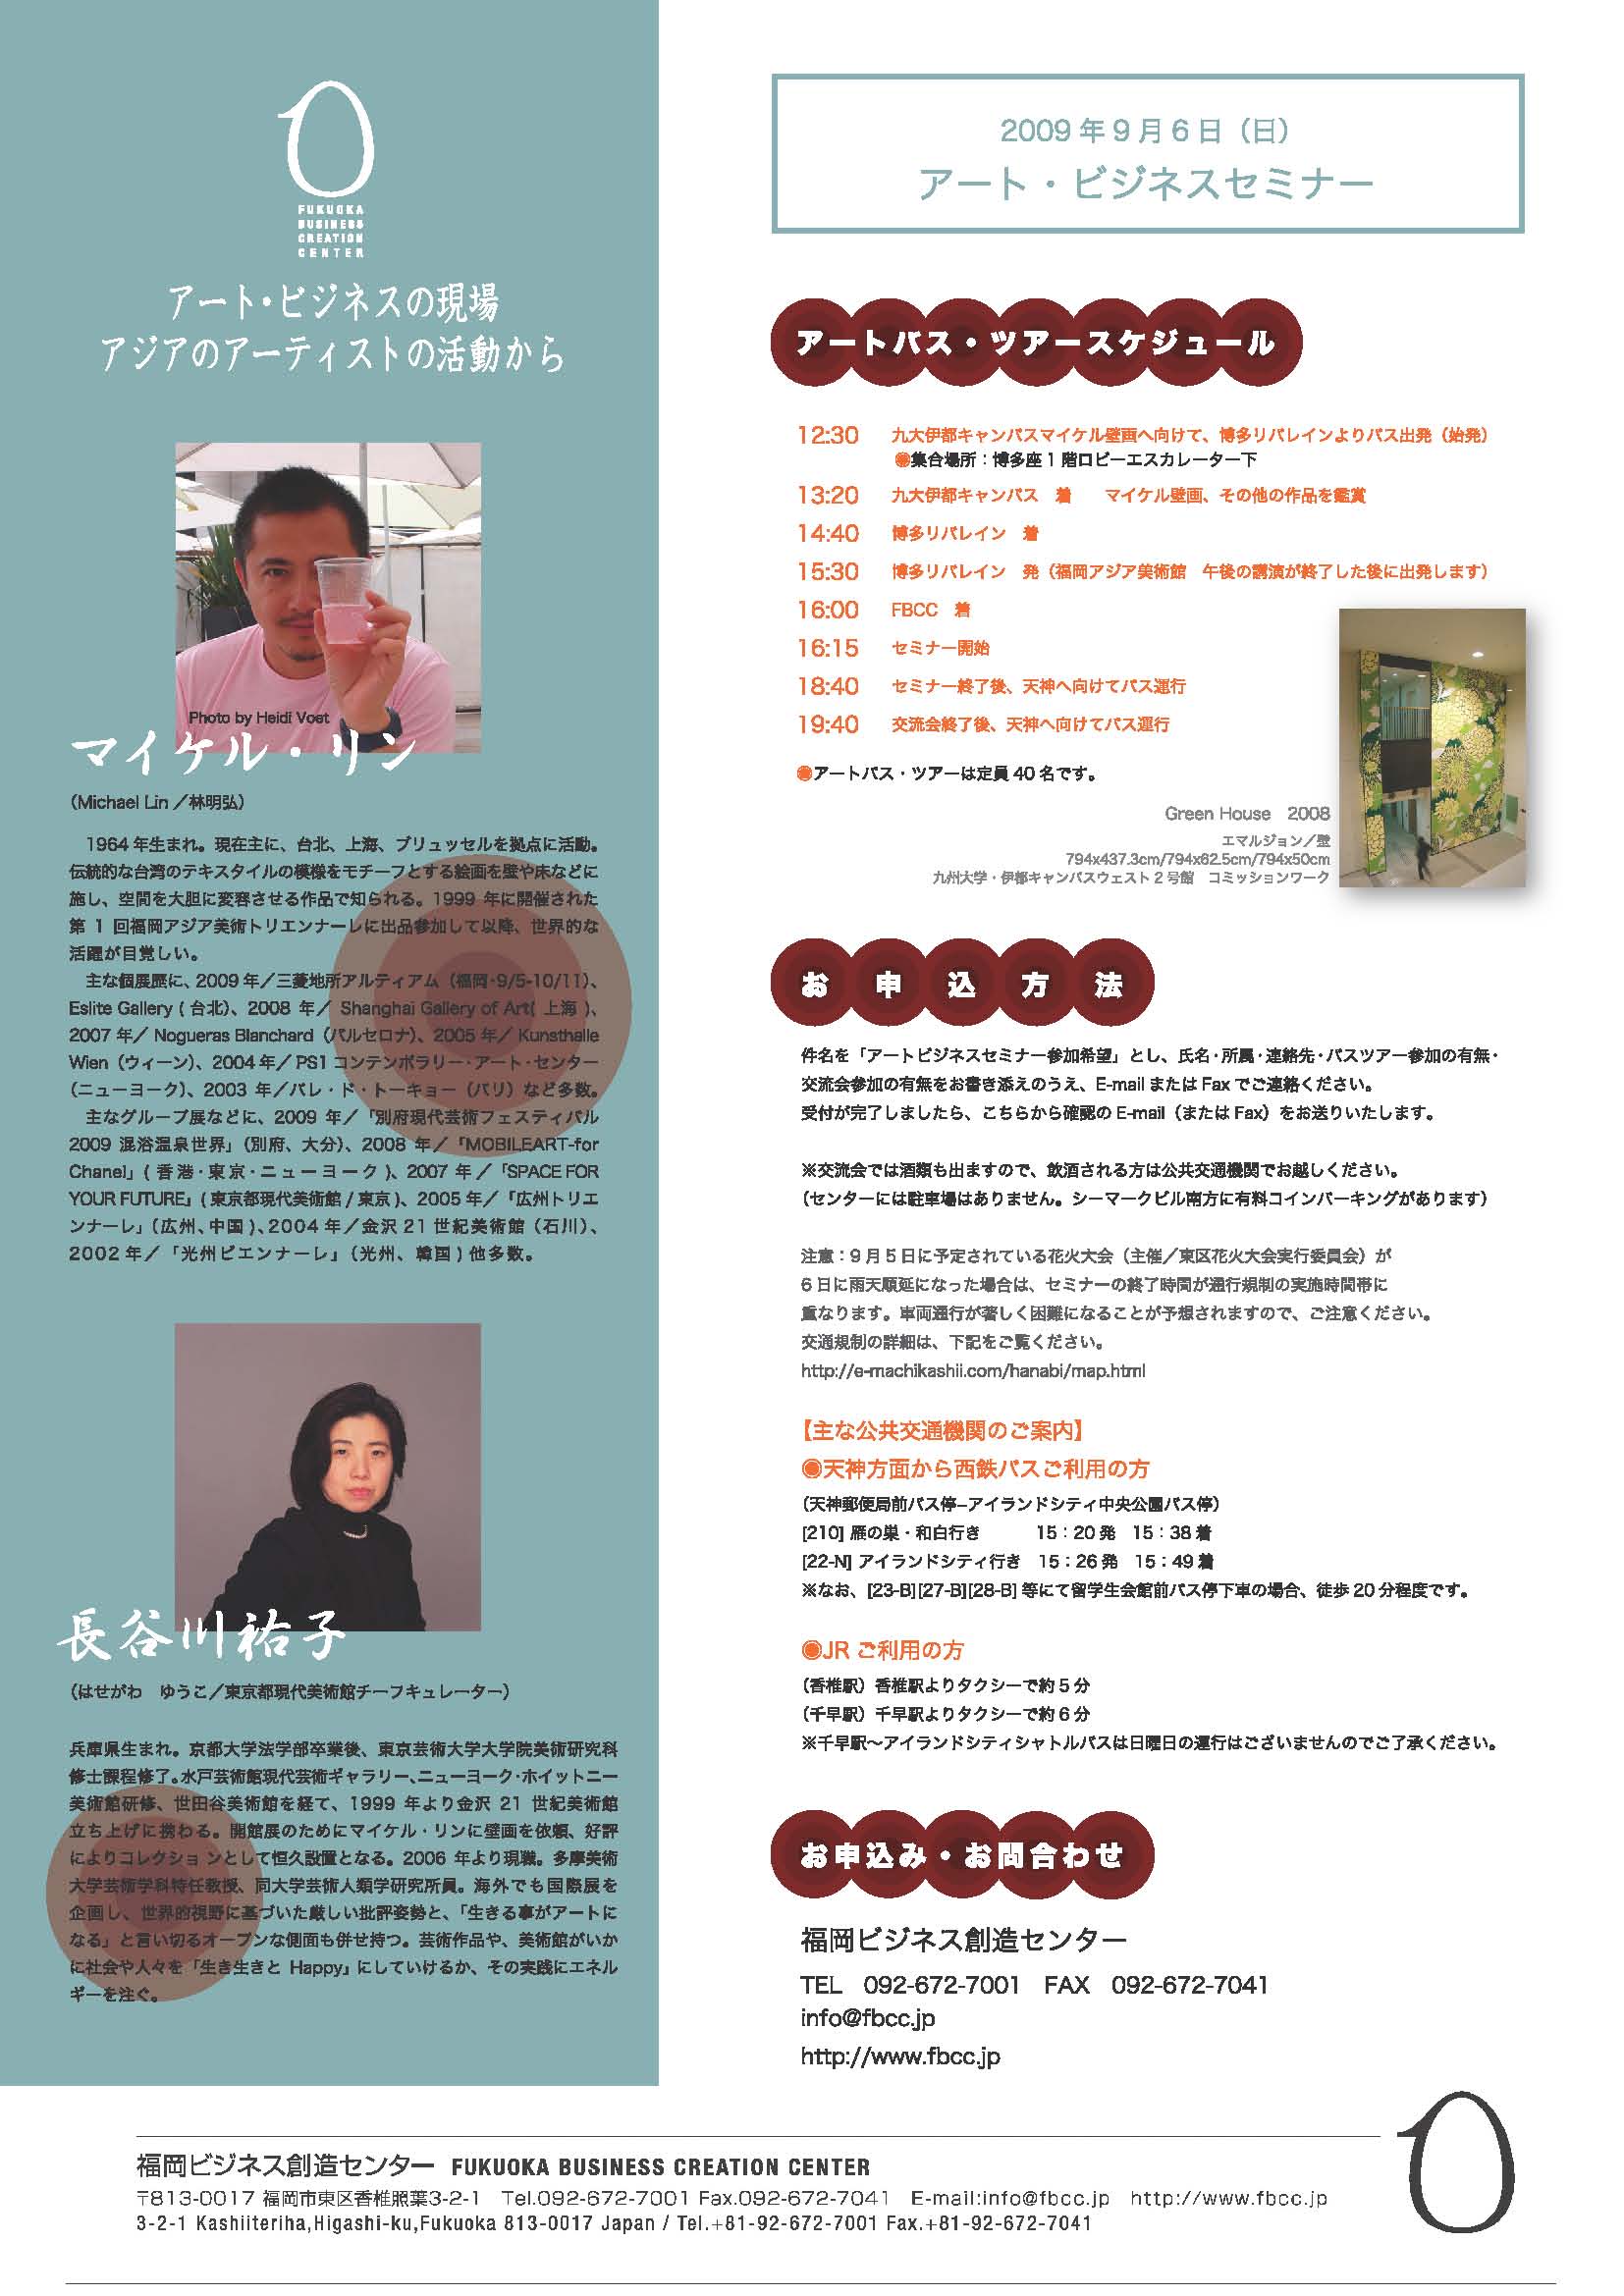 【Michael Lin is going to give a talk at FBCC】マイケル・リンが9月6日にお話します！_e0113826_11542174.jpg